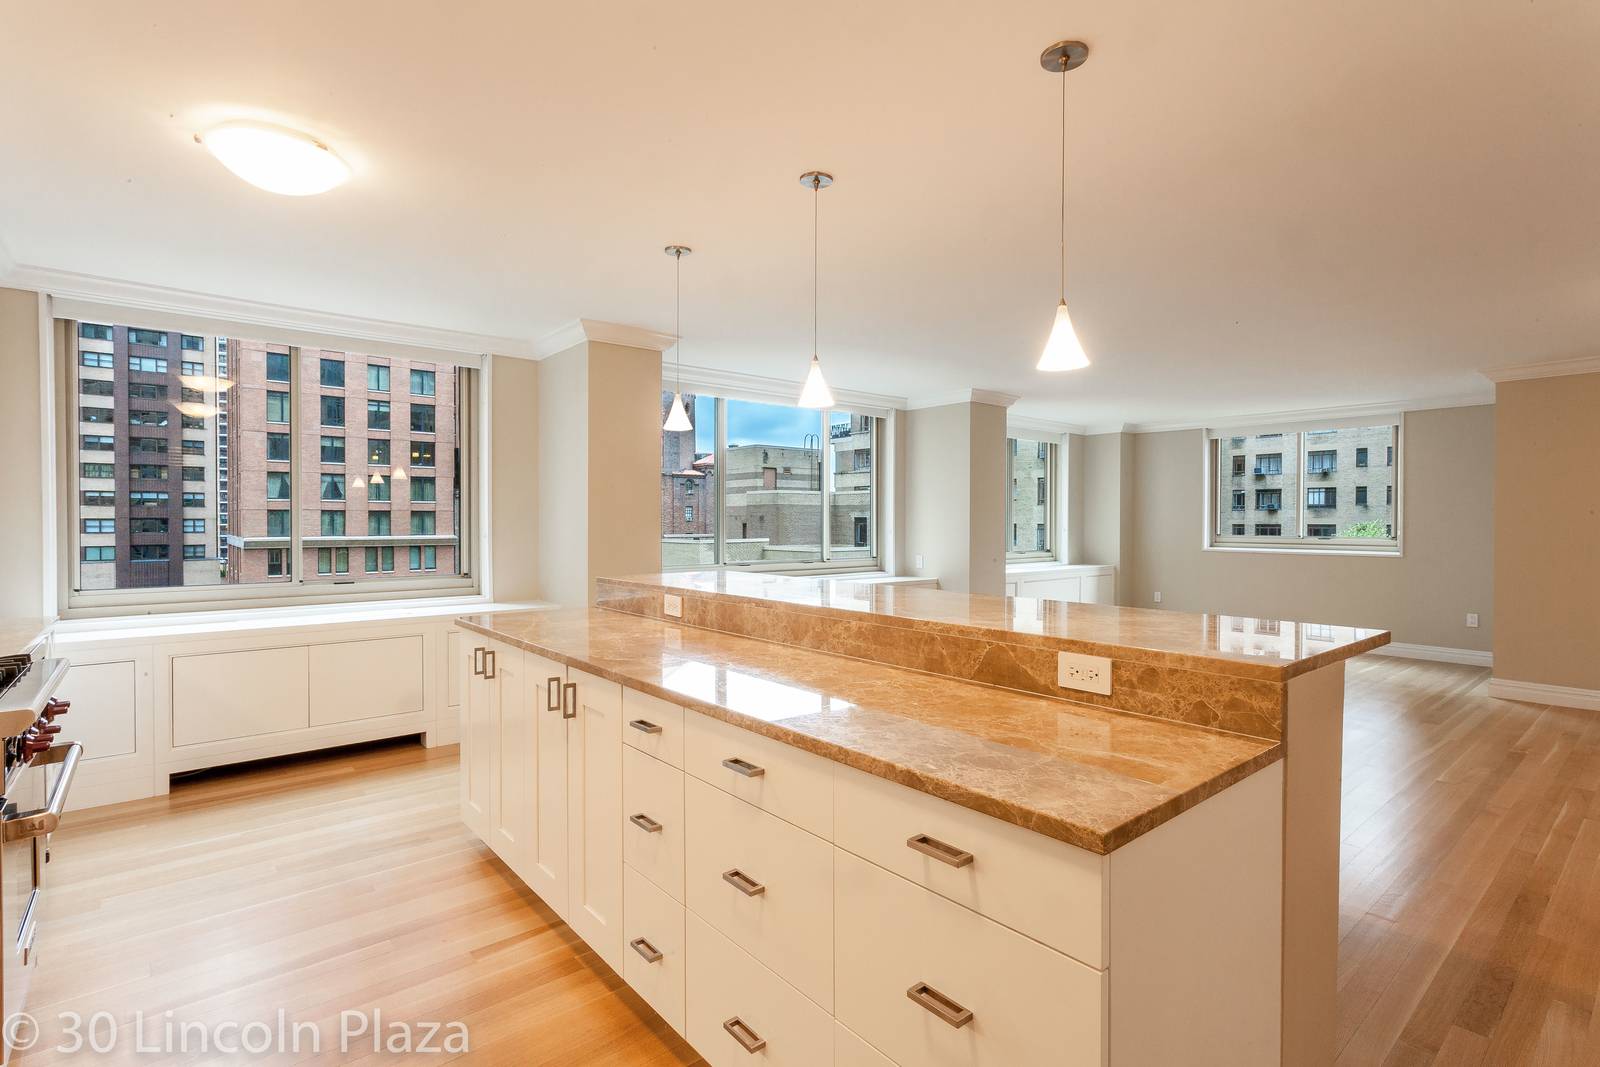 Lincoln Center Grand Three Bedroom/ 3.5 Baths White Glove Ultra-Luxury Amenities Roof Top Club /Spa Gym, Pool, Sauna near Central Park & Columbus Circle Upper West Side